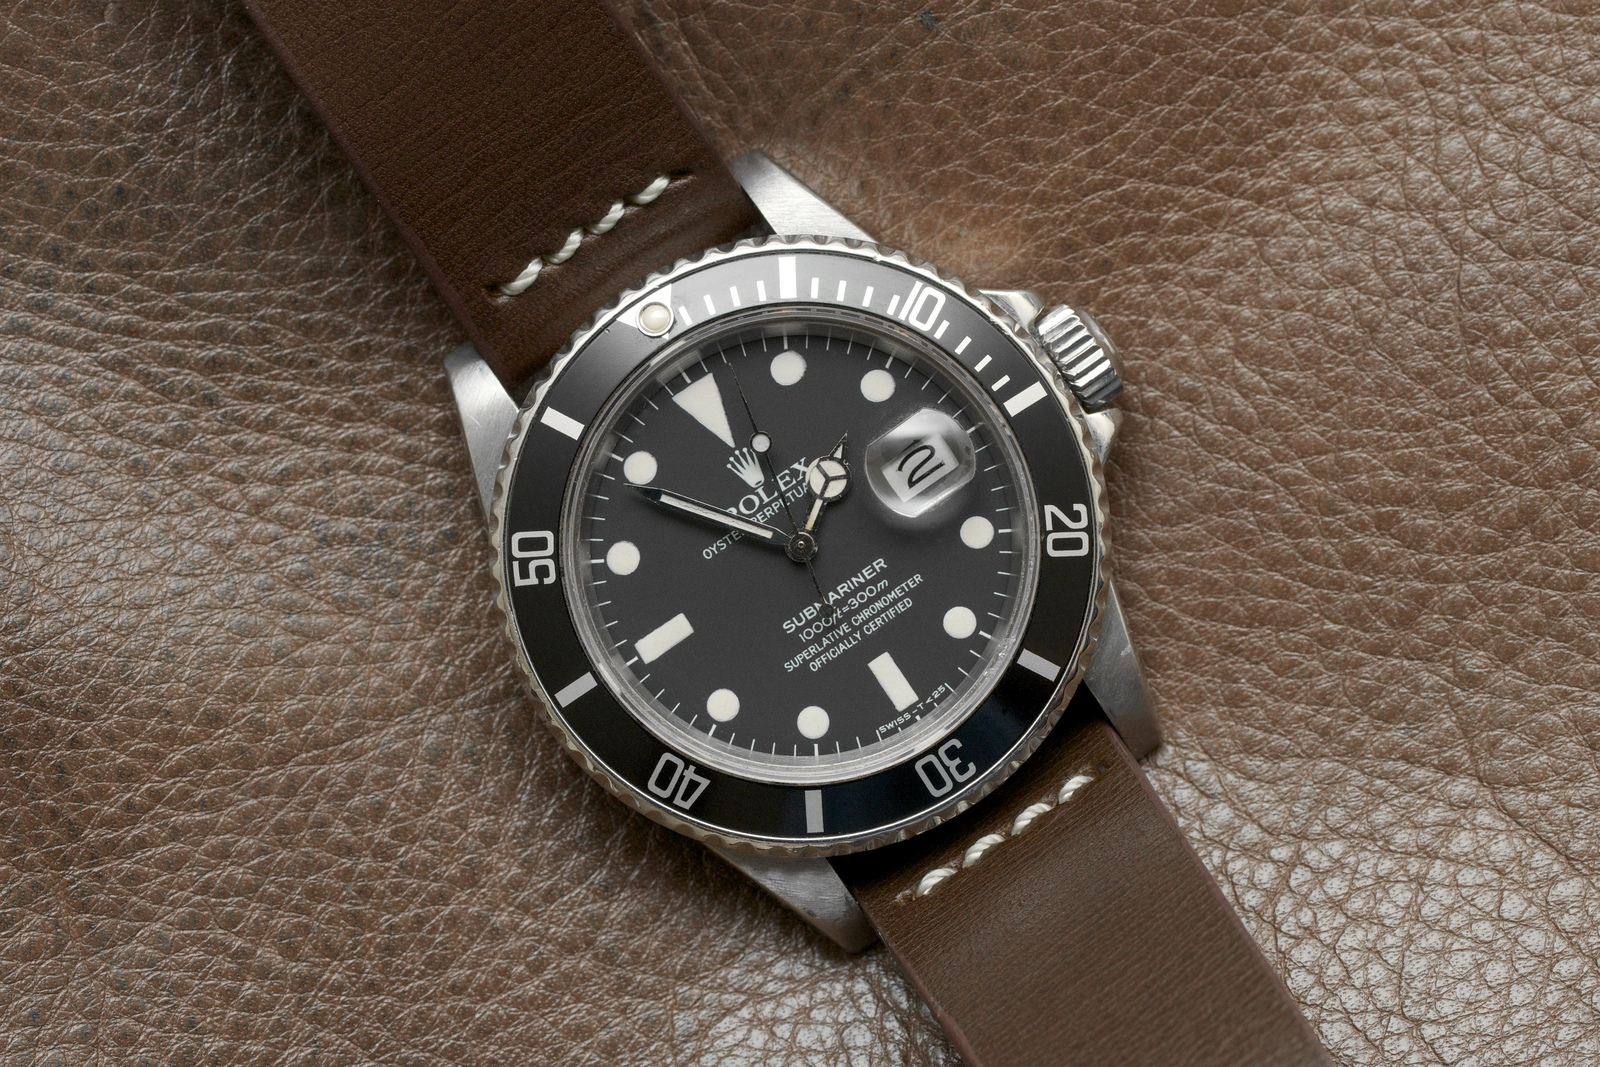 REVIEW: What Rolex Submariner should I 